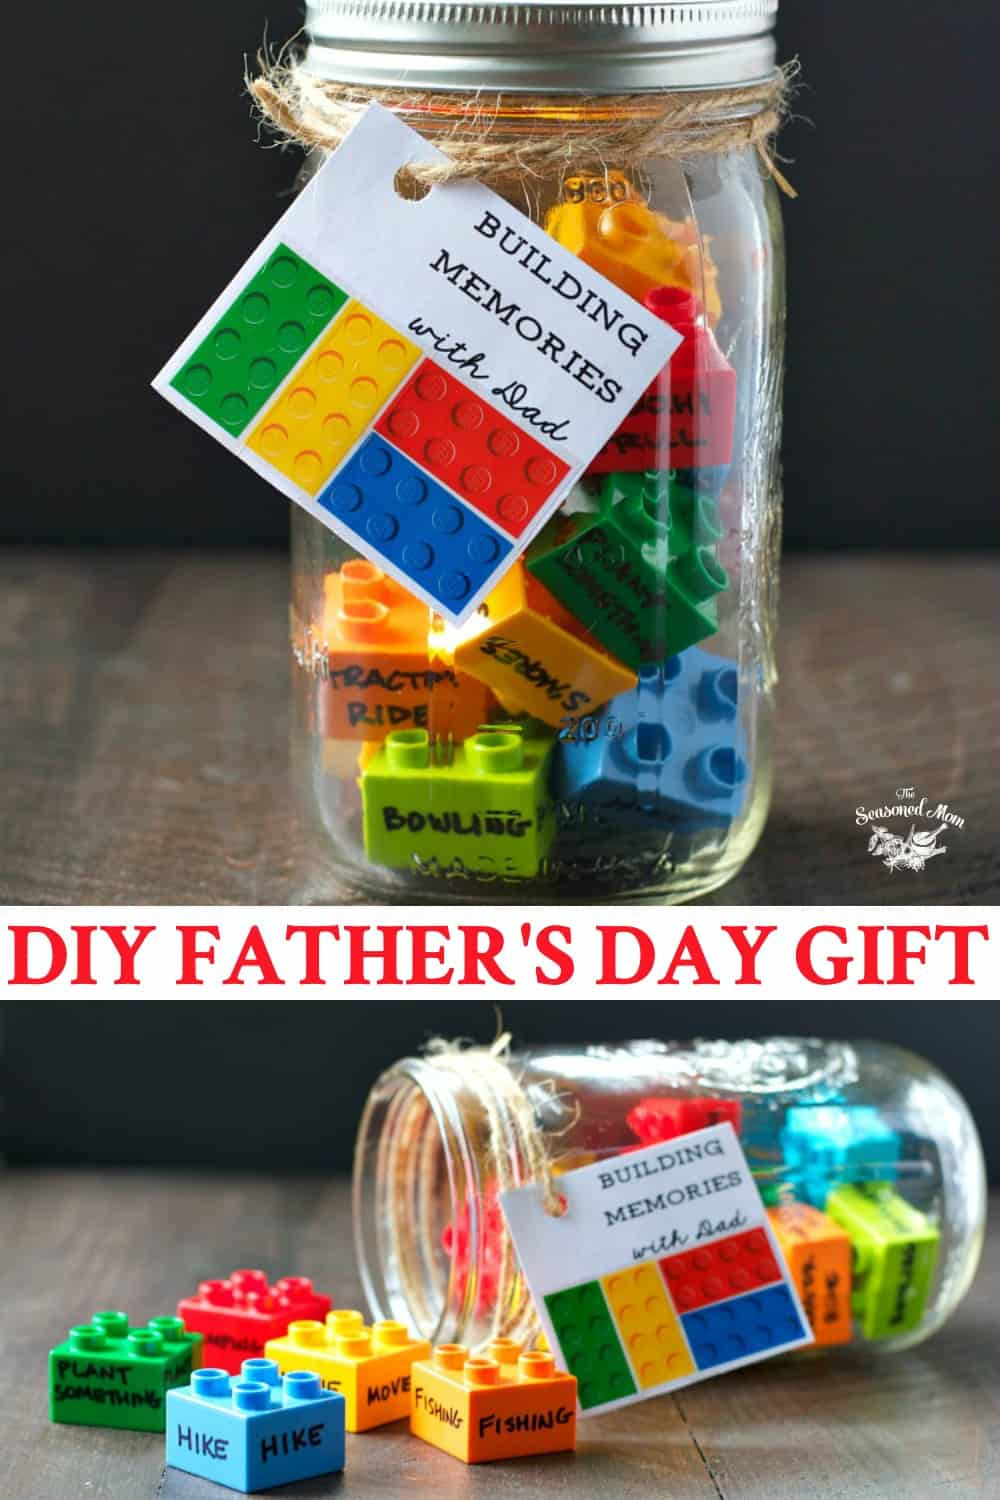 Father'S Day Fishing Gift Ideas
 DIY Father s Day Gift Building Memories with Dad The